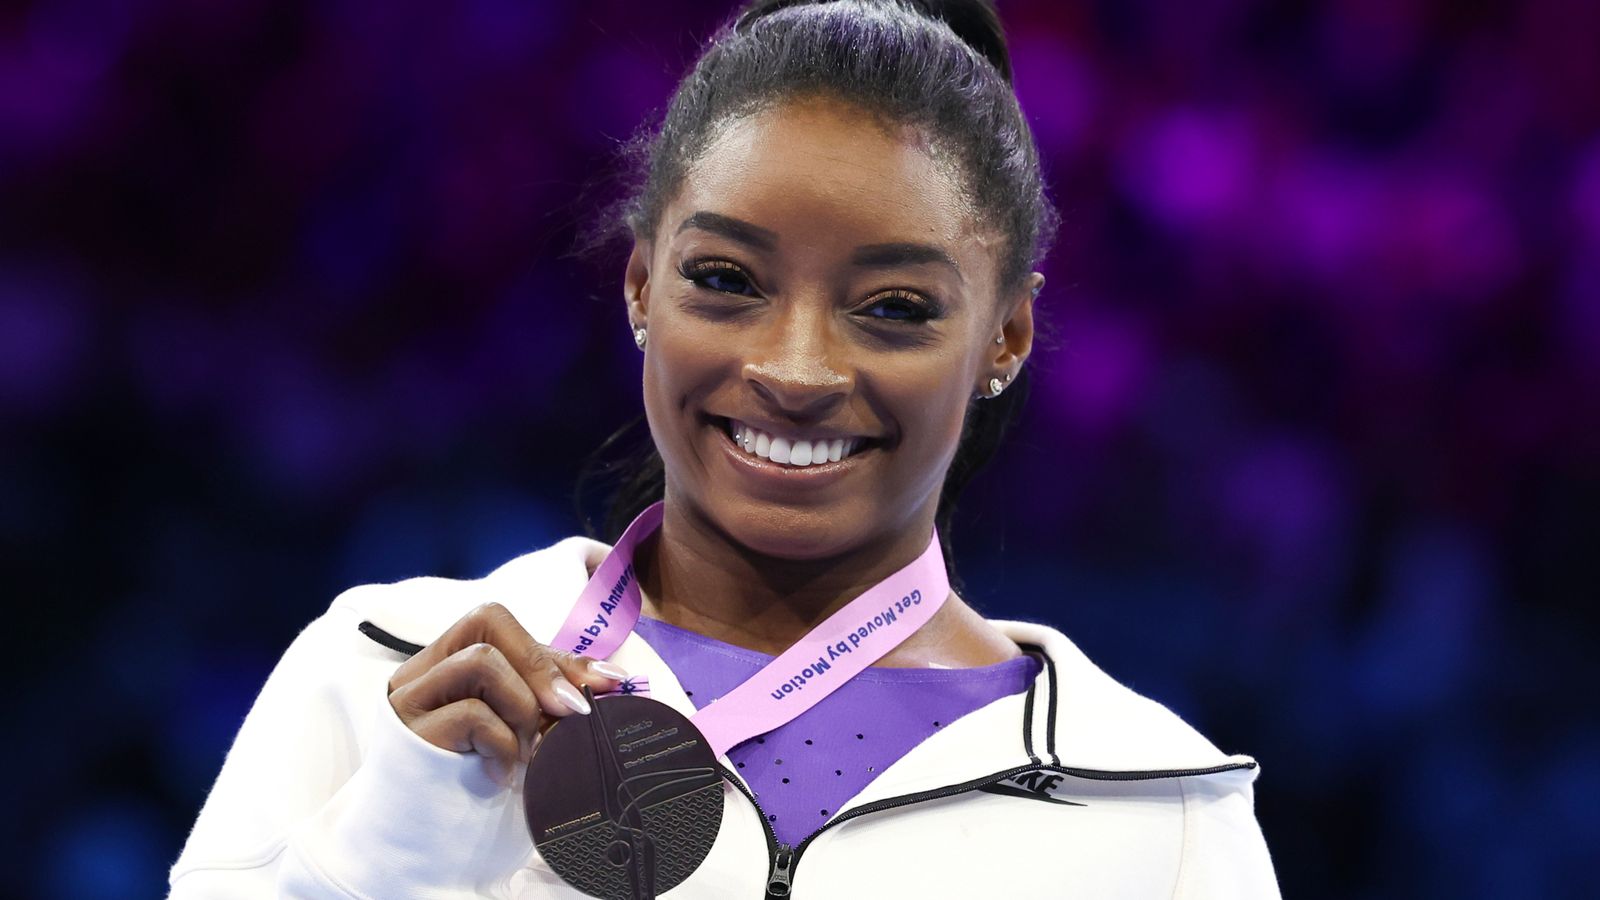 Simone Biles wins two more gold medals for USA at World Championships